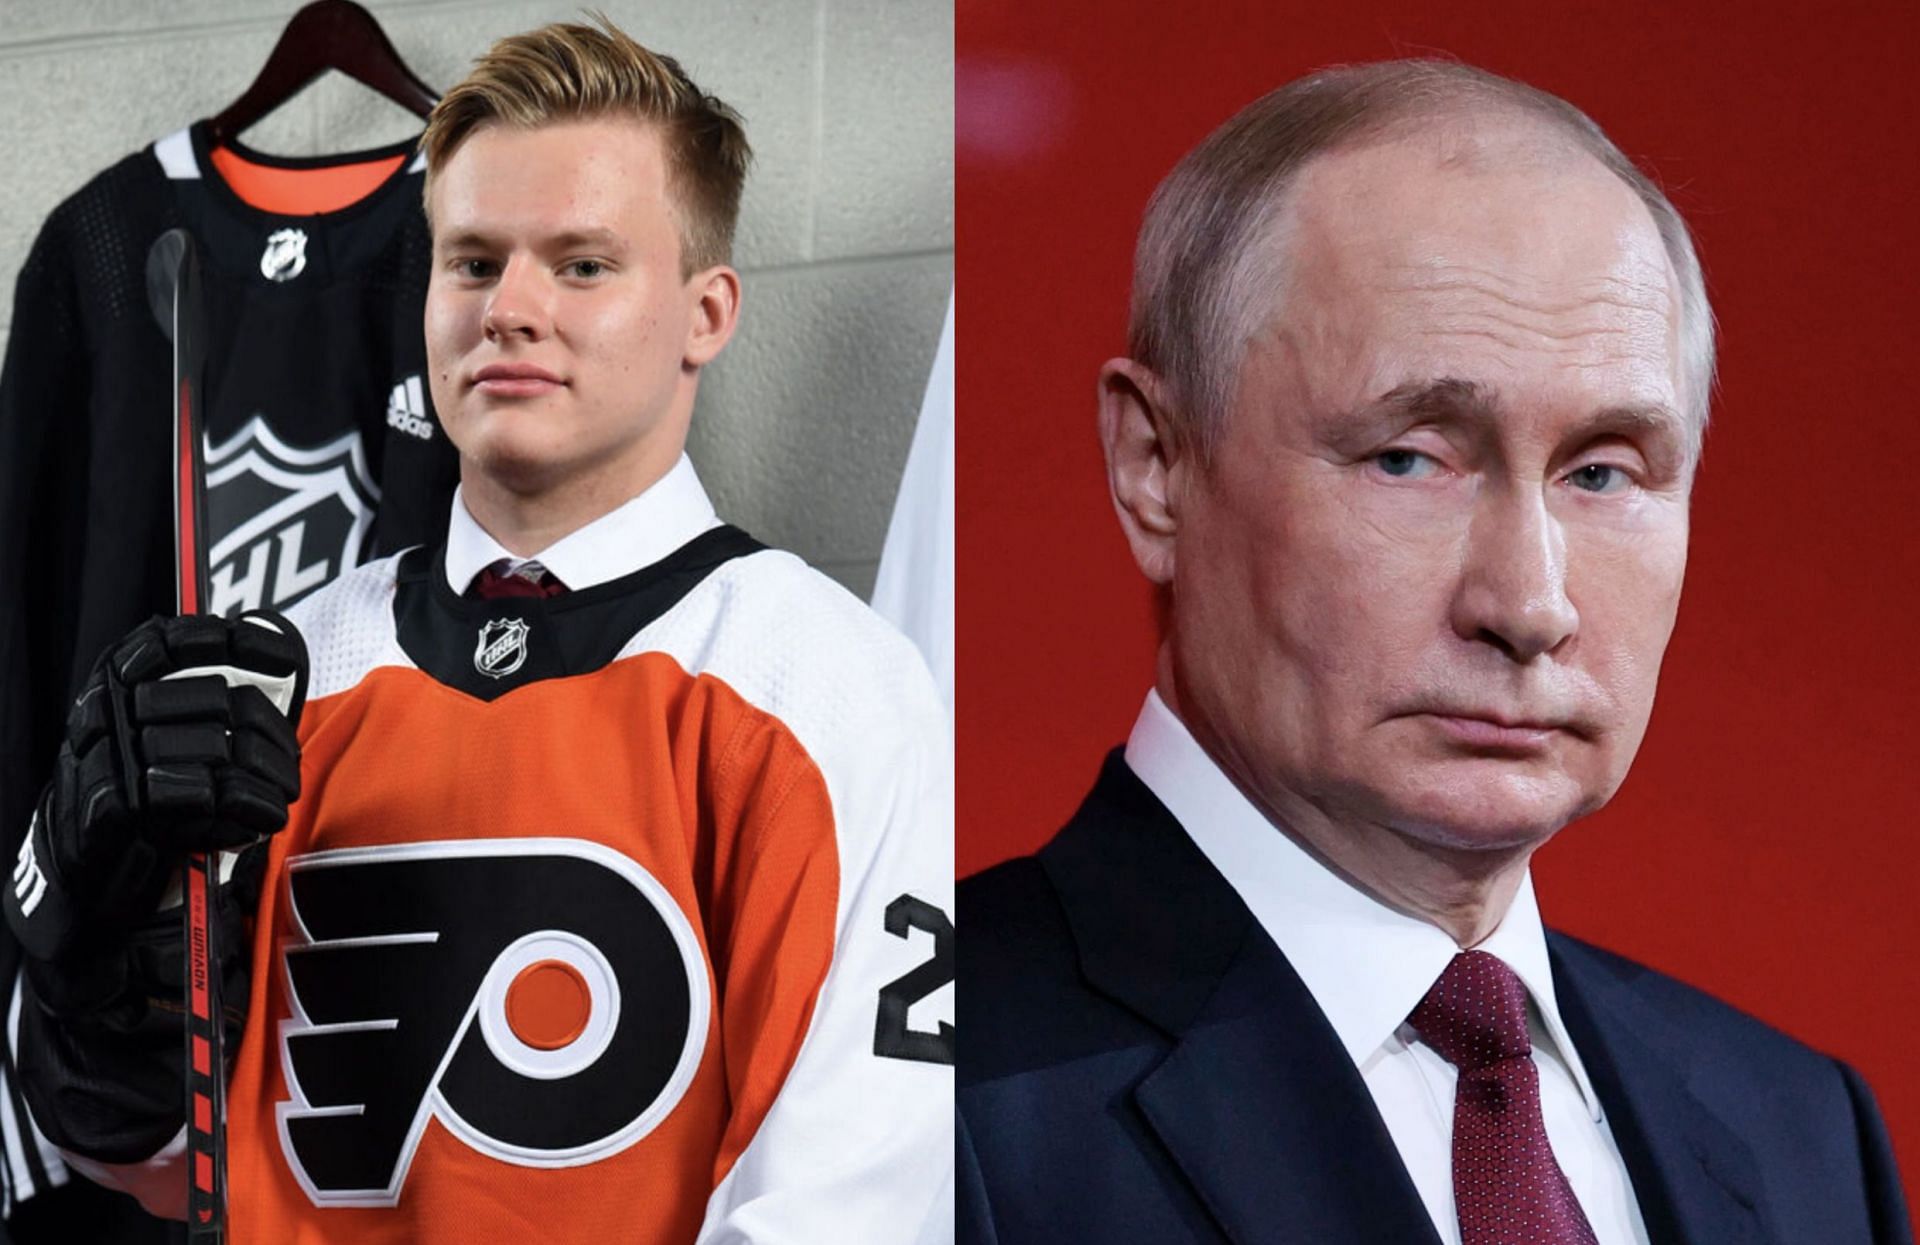 NHL agent reveals message for Russian players by Vladimir Putin